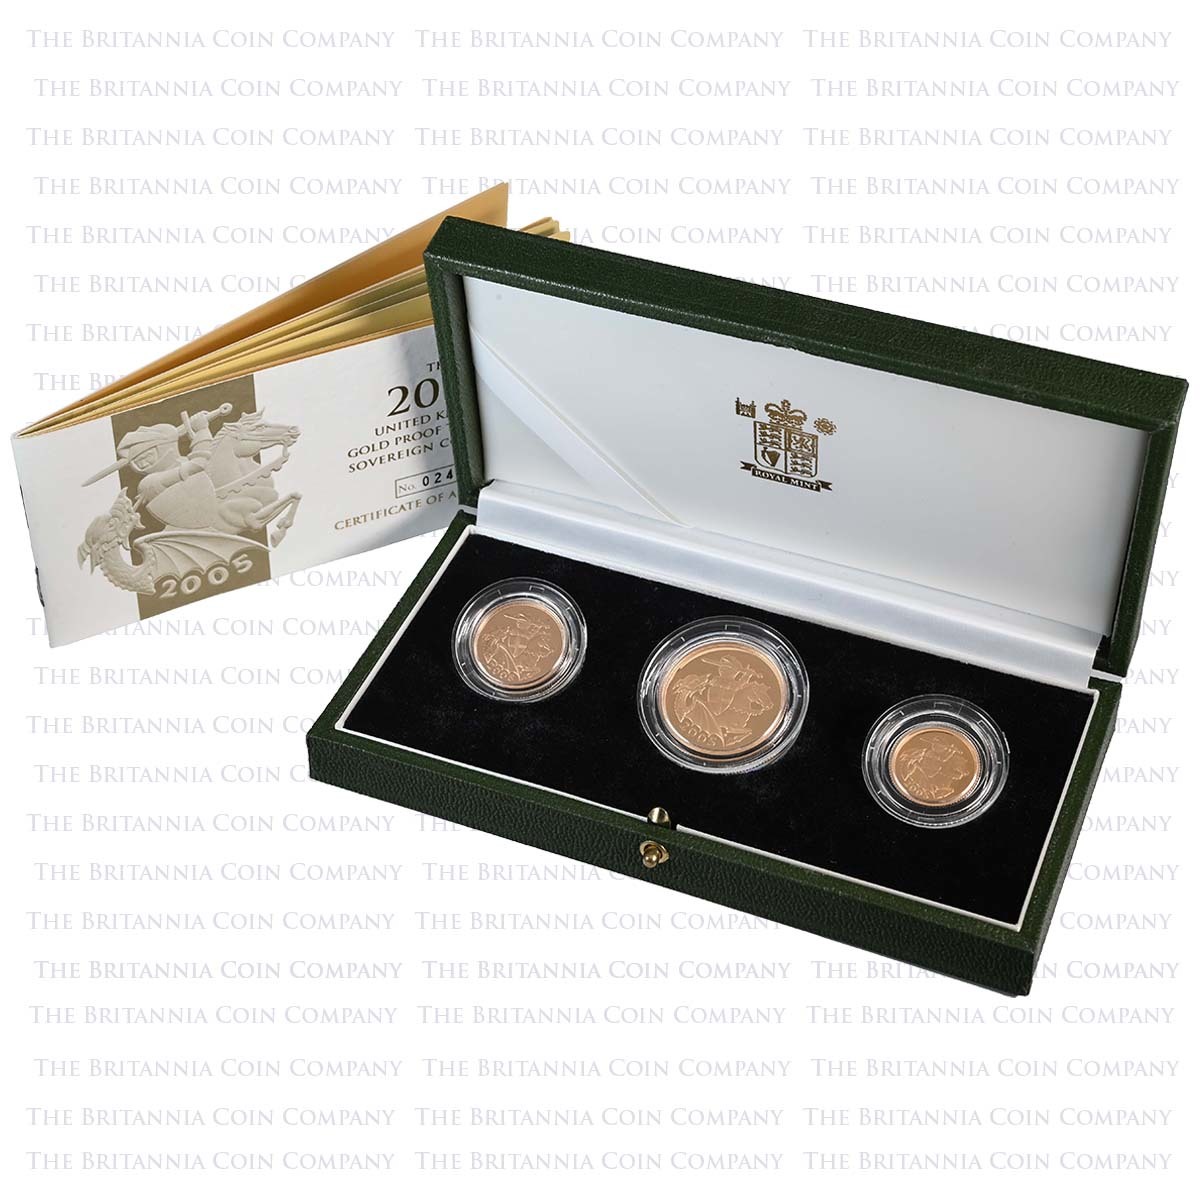 2005 Elizabeth II 3 Coin Gold Proof Sovereign Set Timothy Noad Boxed